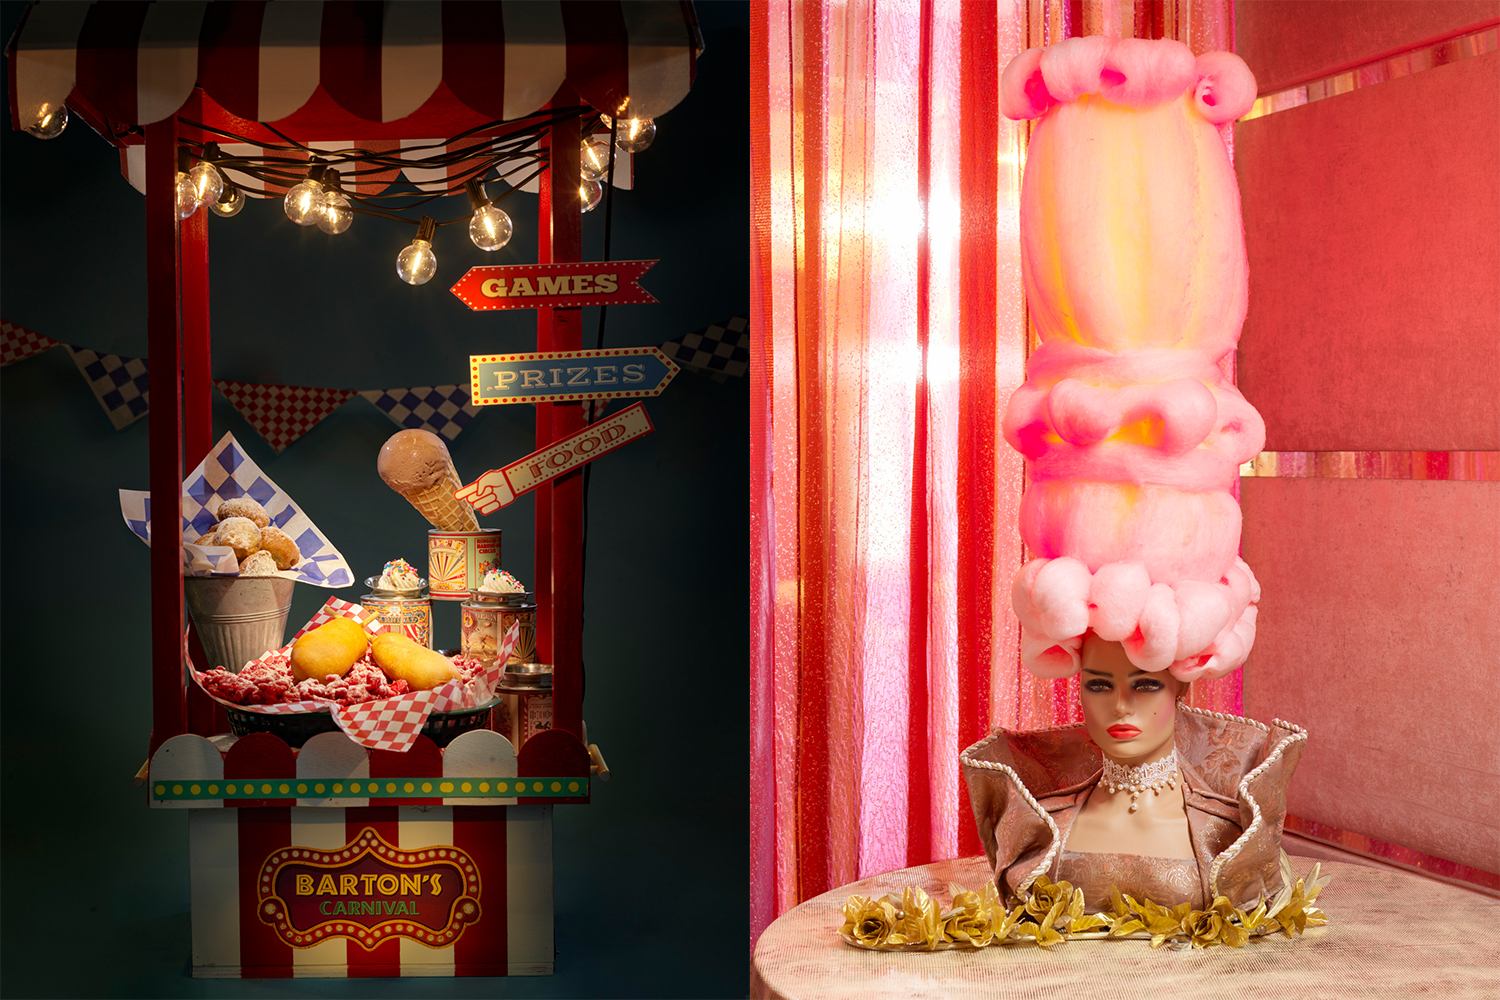 Barton's Vintage Carnival (left) and Marie Antoinette, the two desserts at Barton G. Yes, that's cotton candy.